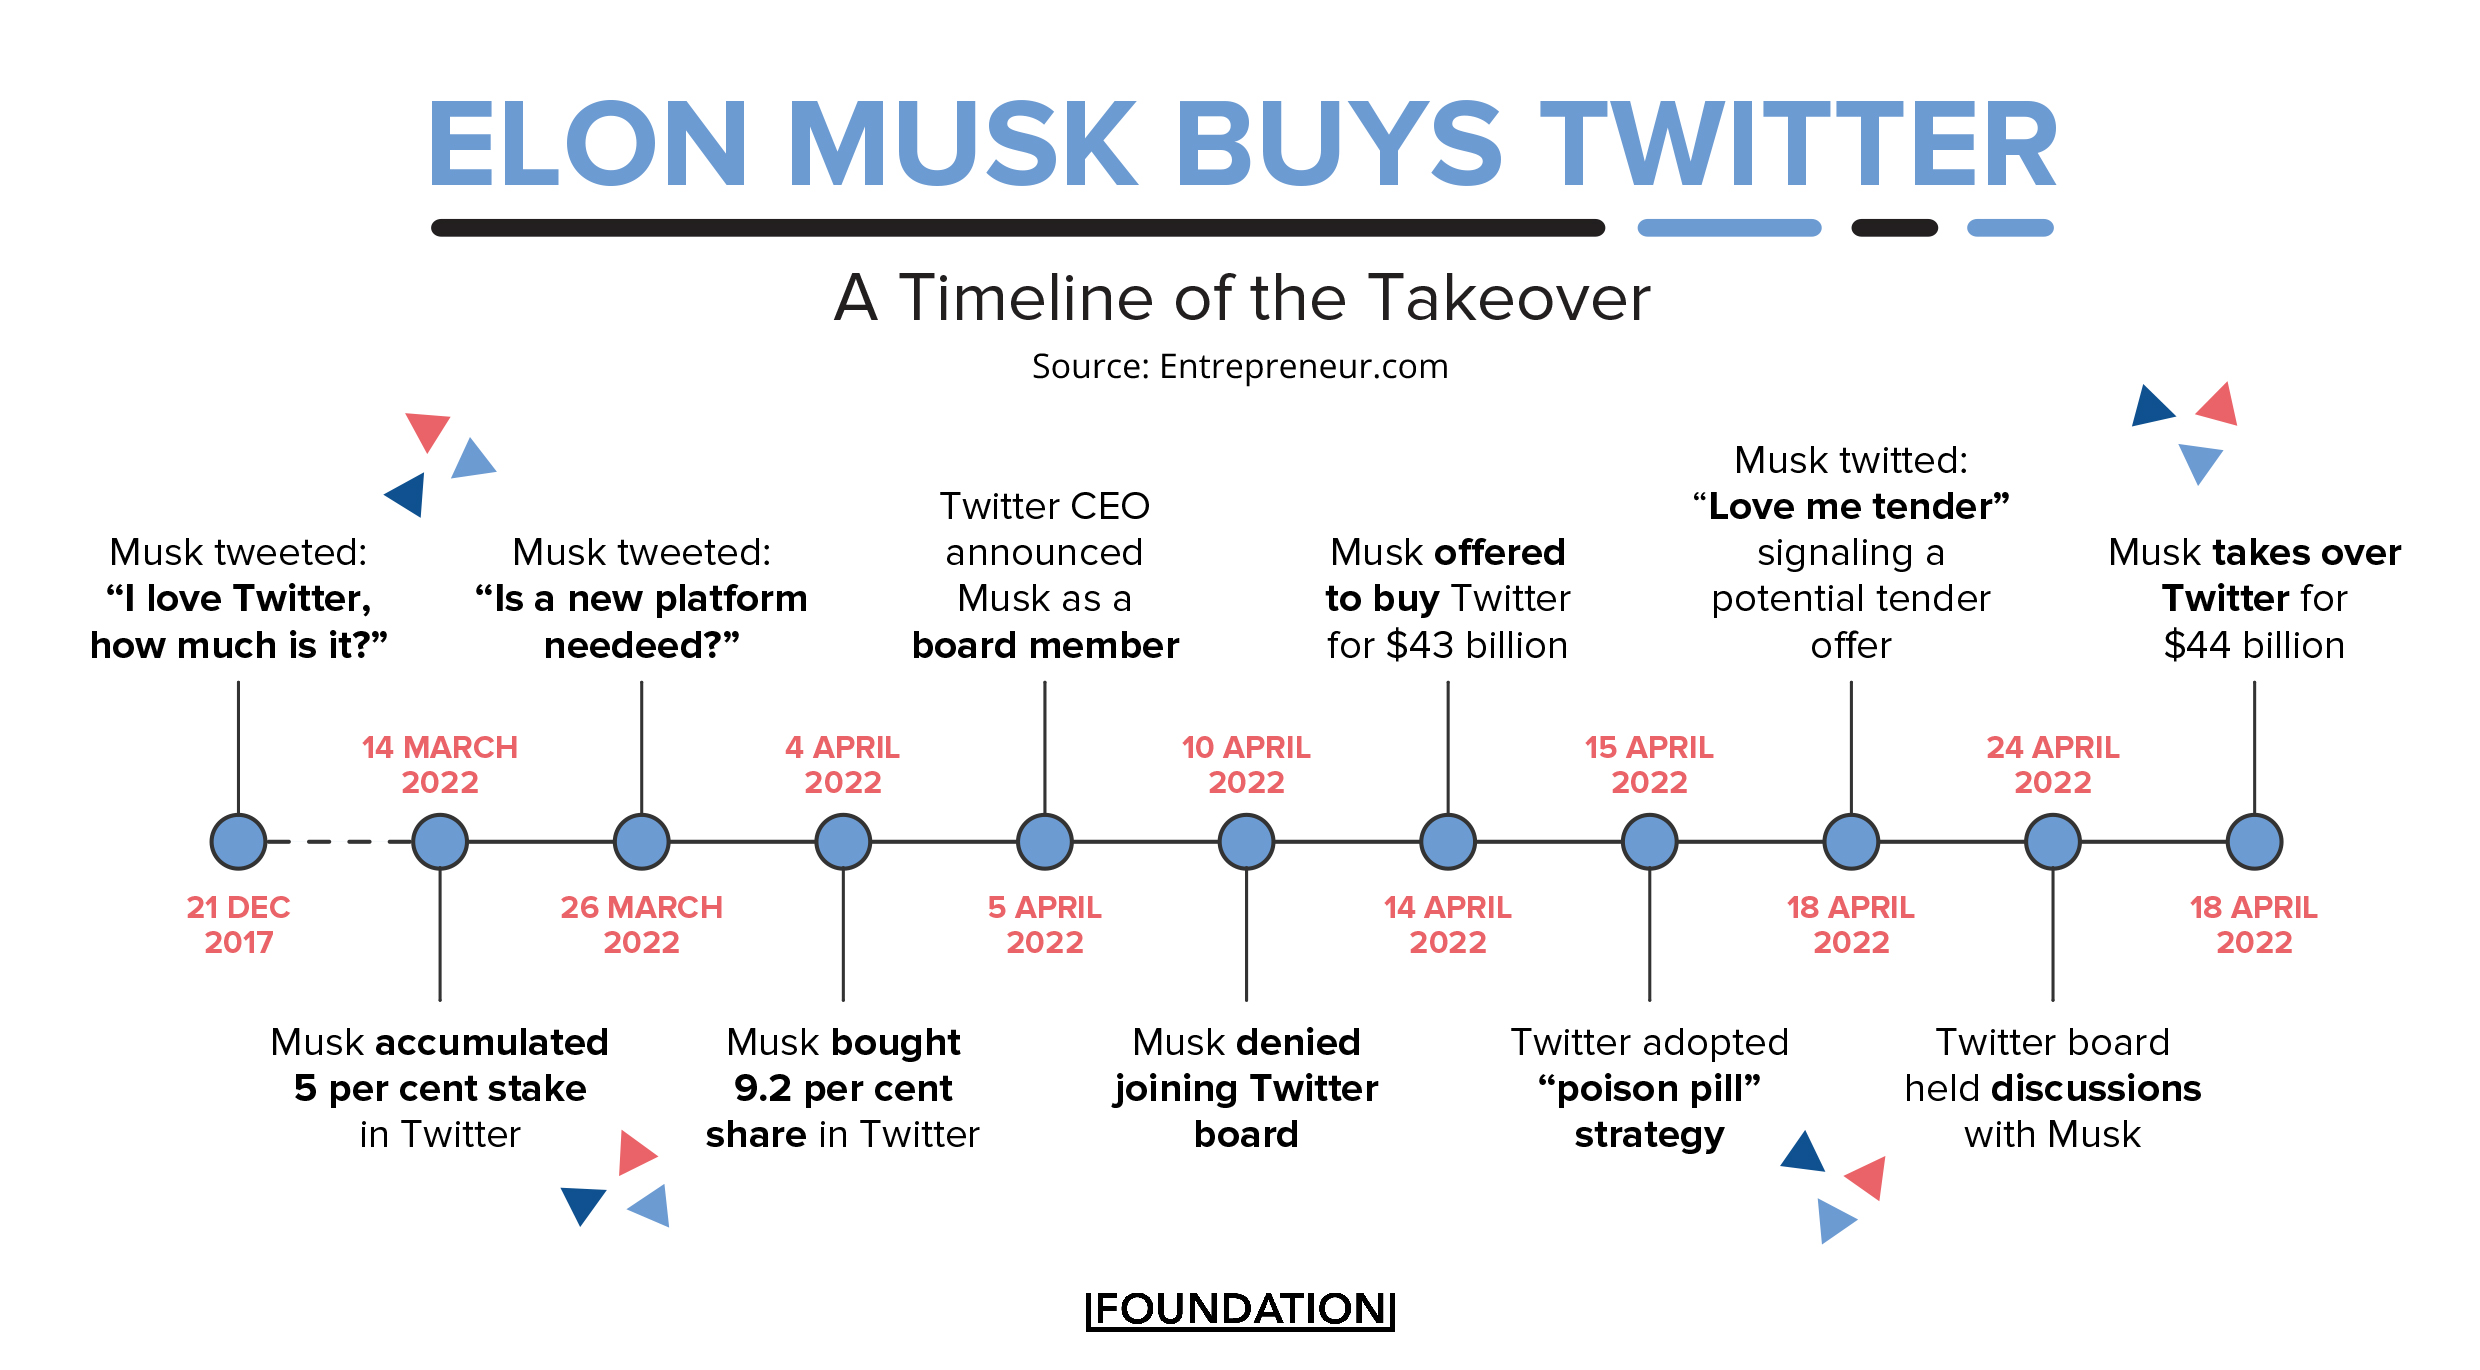 roadmap to Elon Musk putting in an offer on Twitter